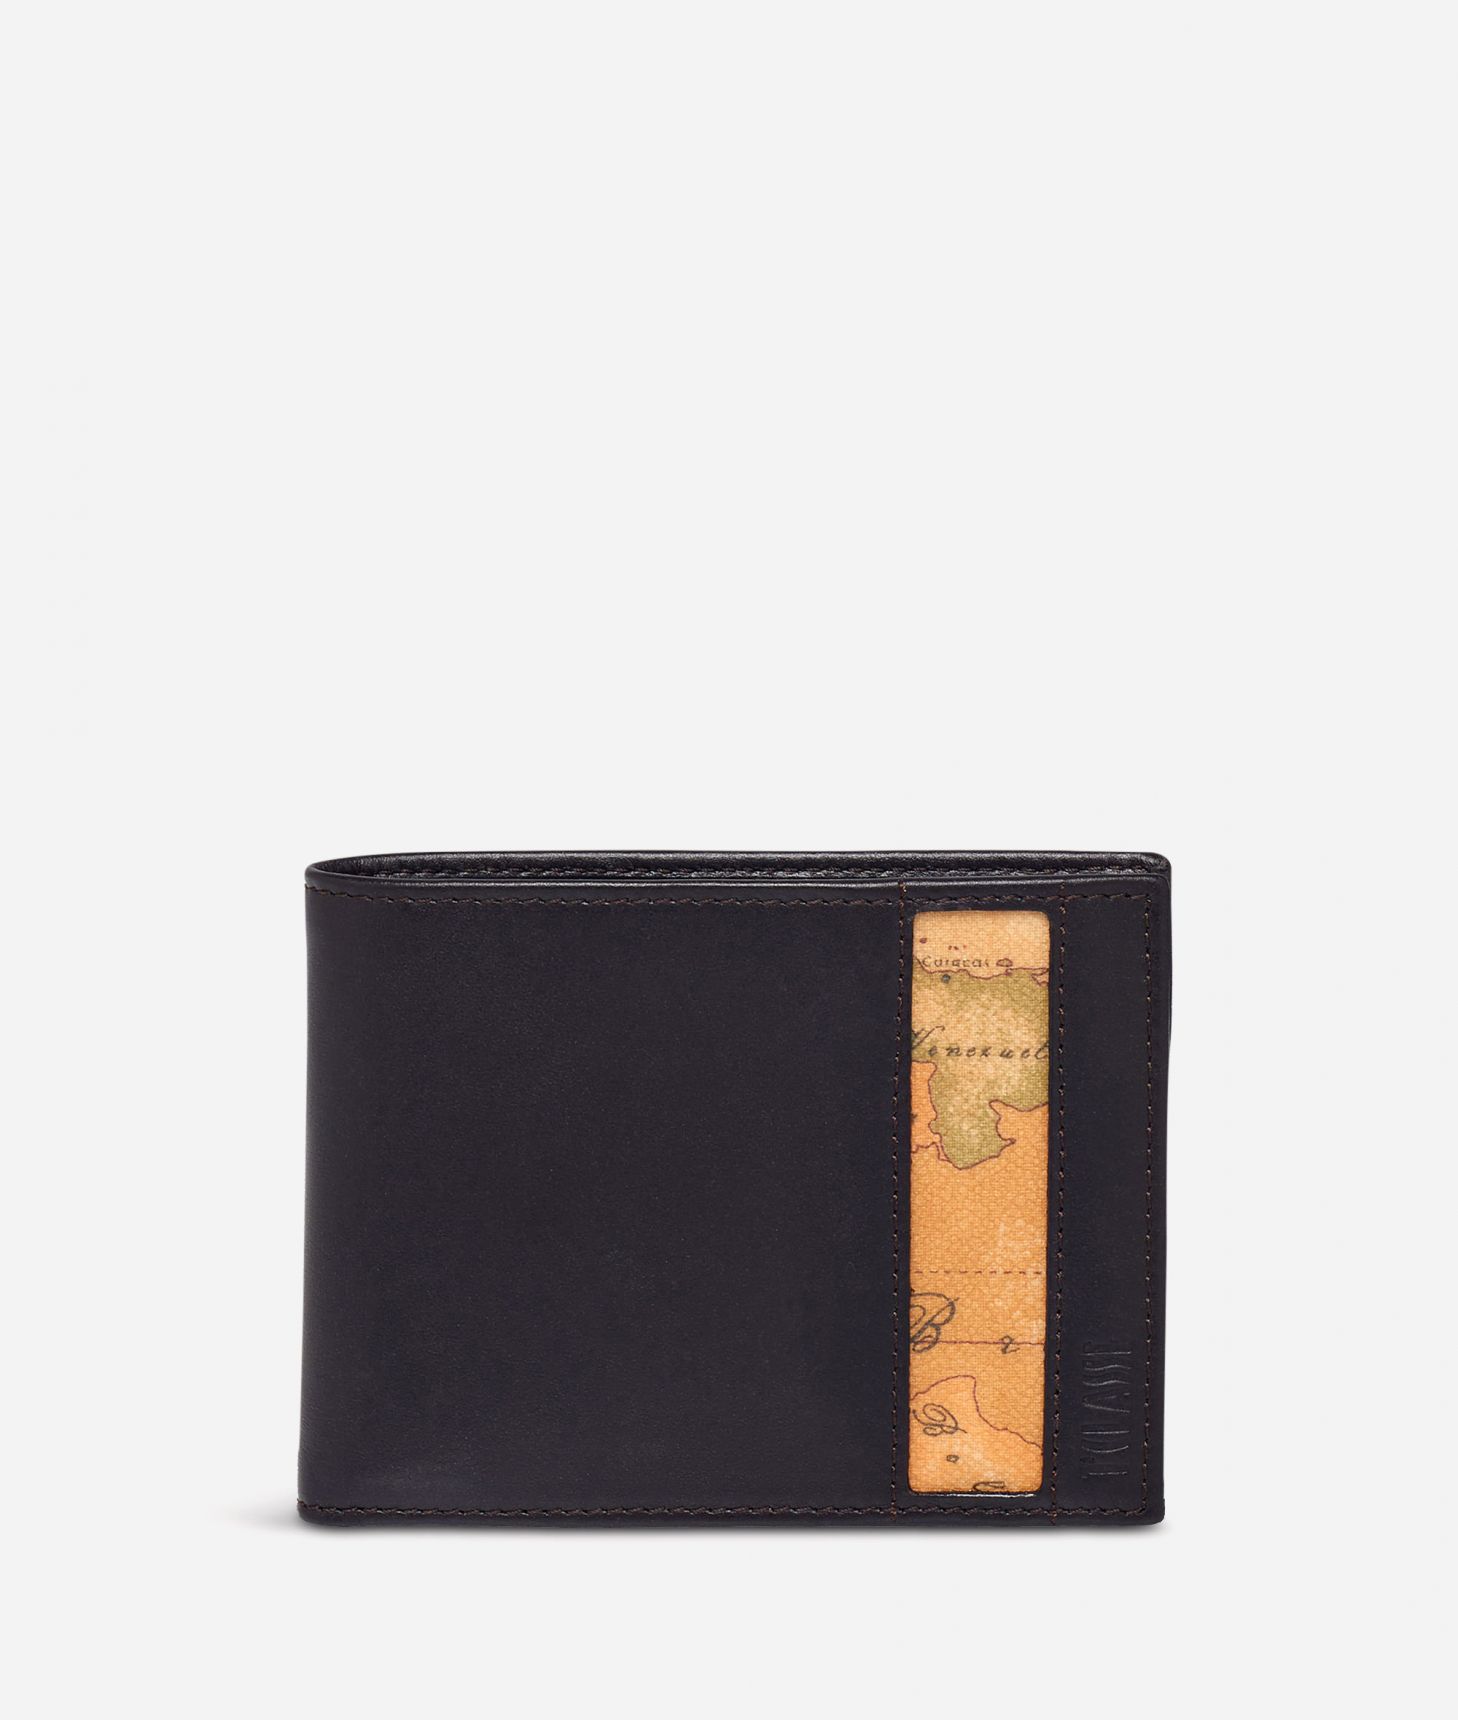 Small leather wallet Geo Classic fabric trims,front